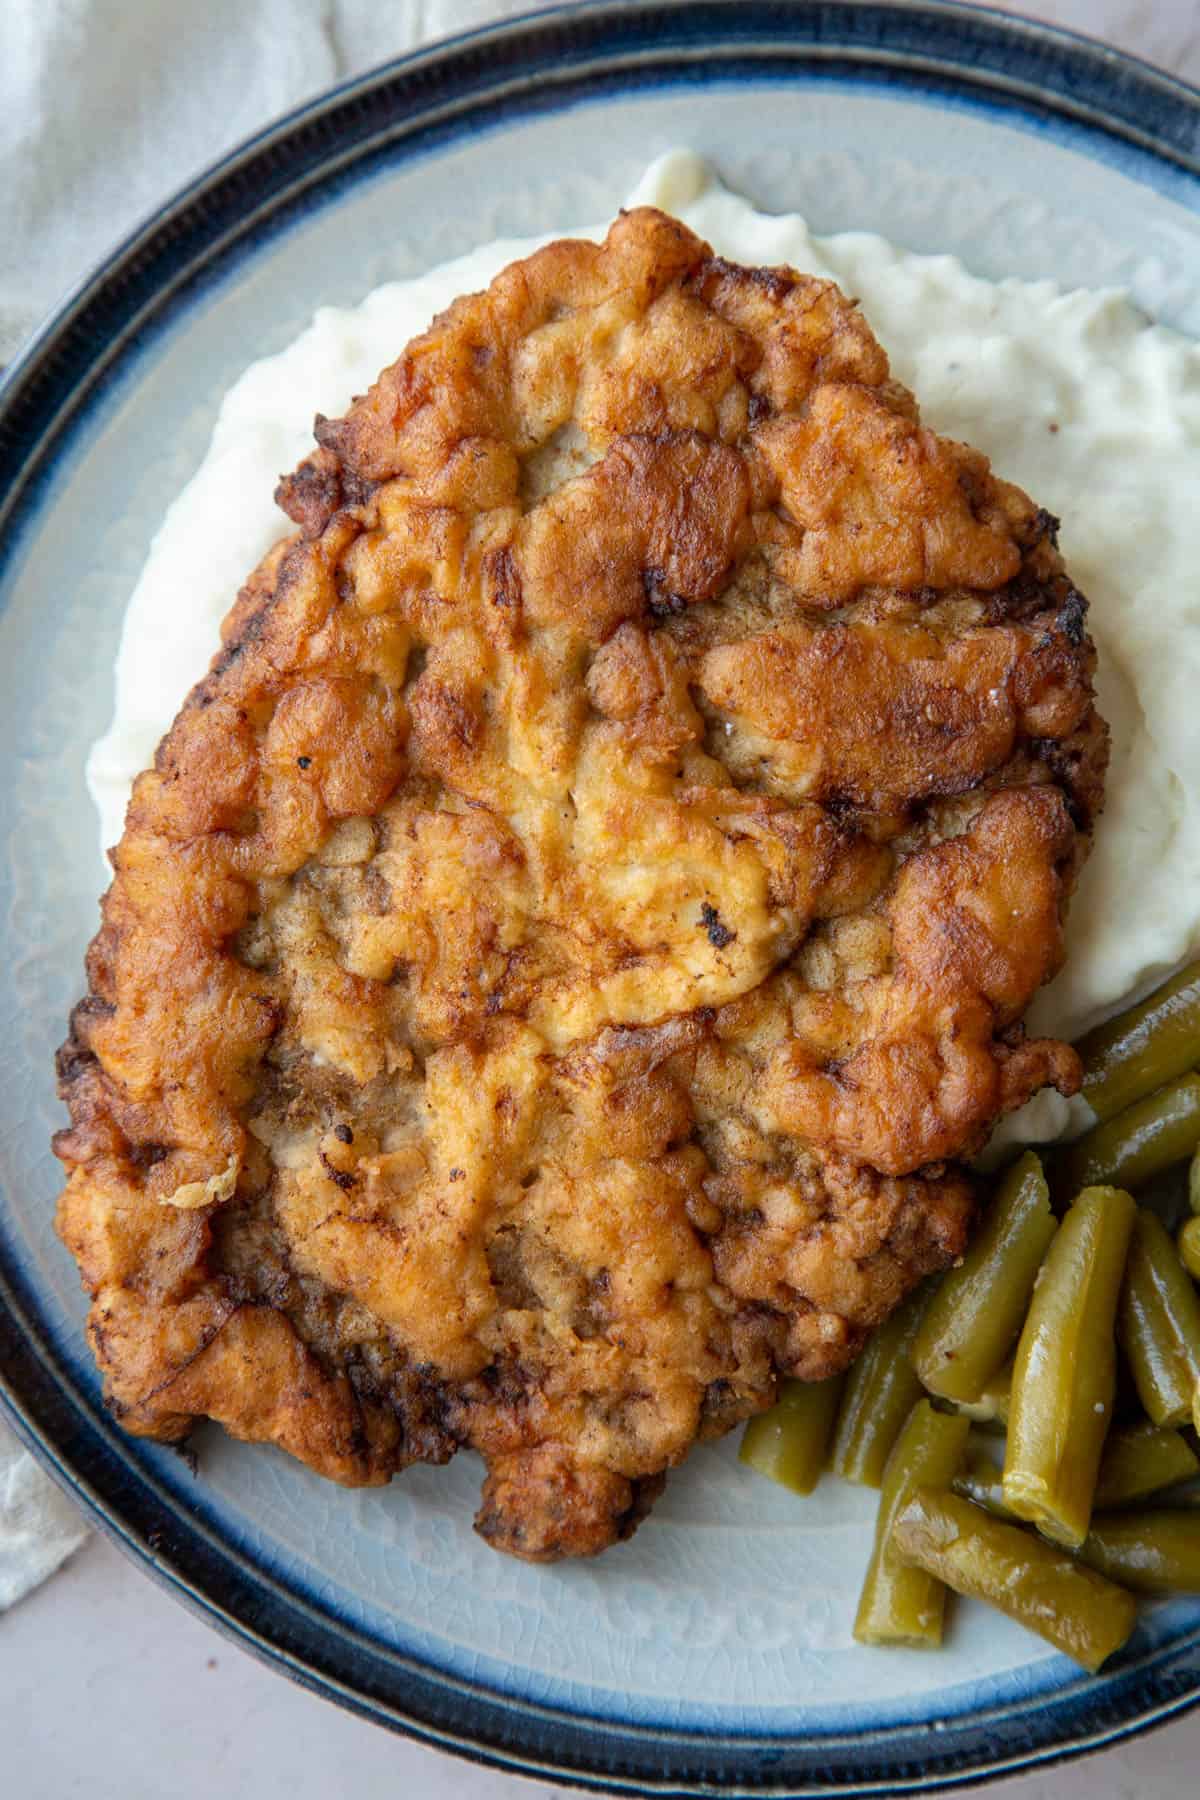 chicken fried steak on a bed of mashed potatoes.